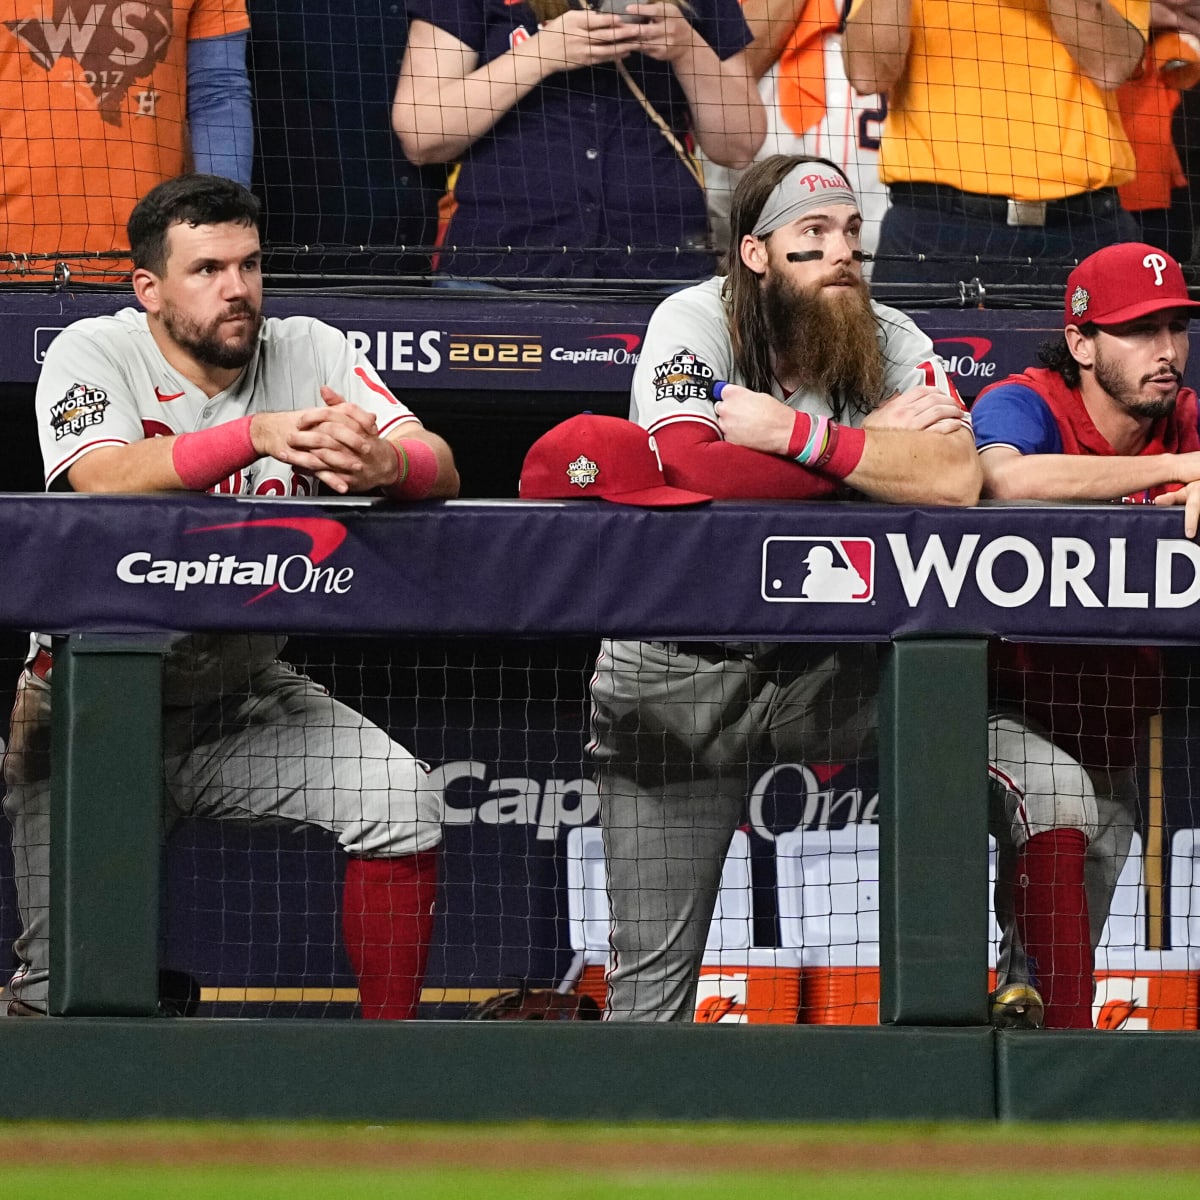 See images from the Phillies' loss to the Astros to end the World Series in Game  6